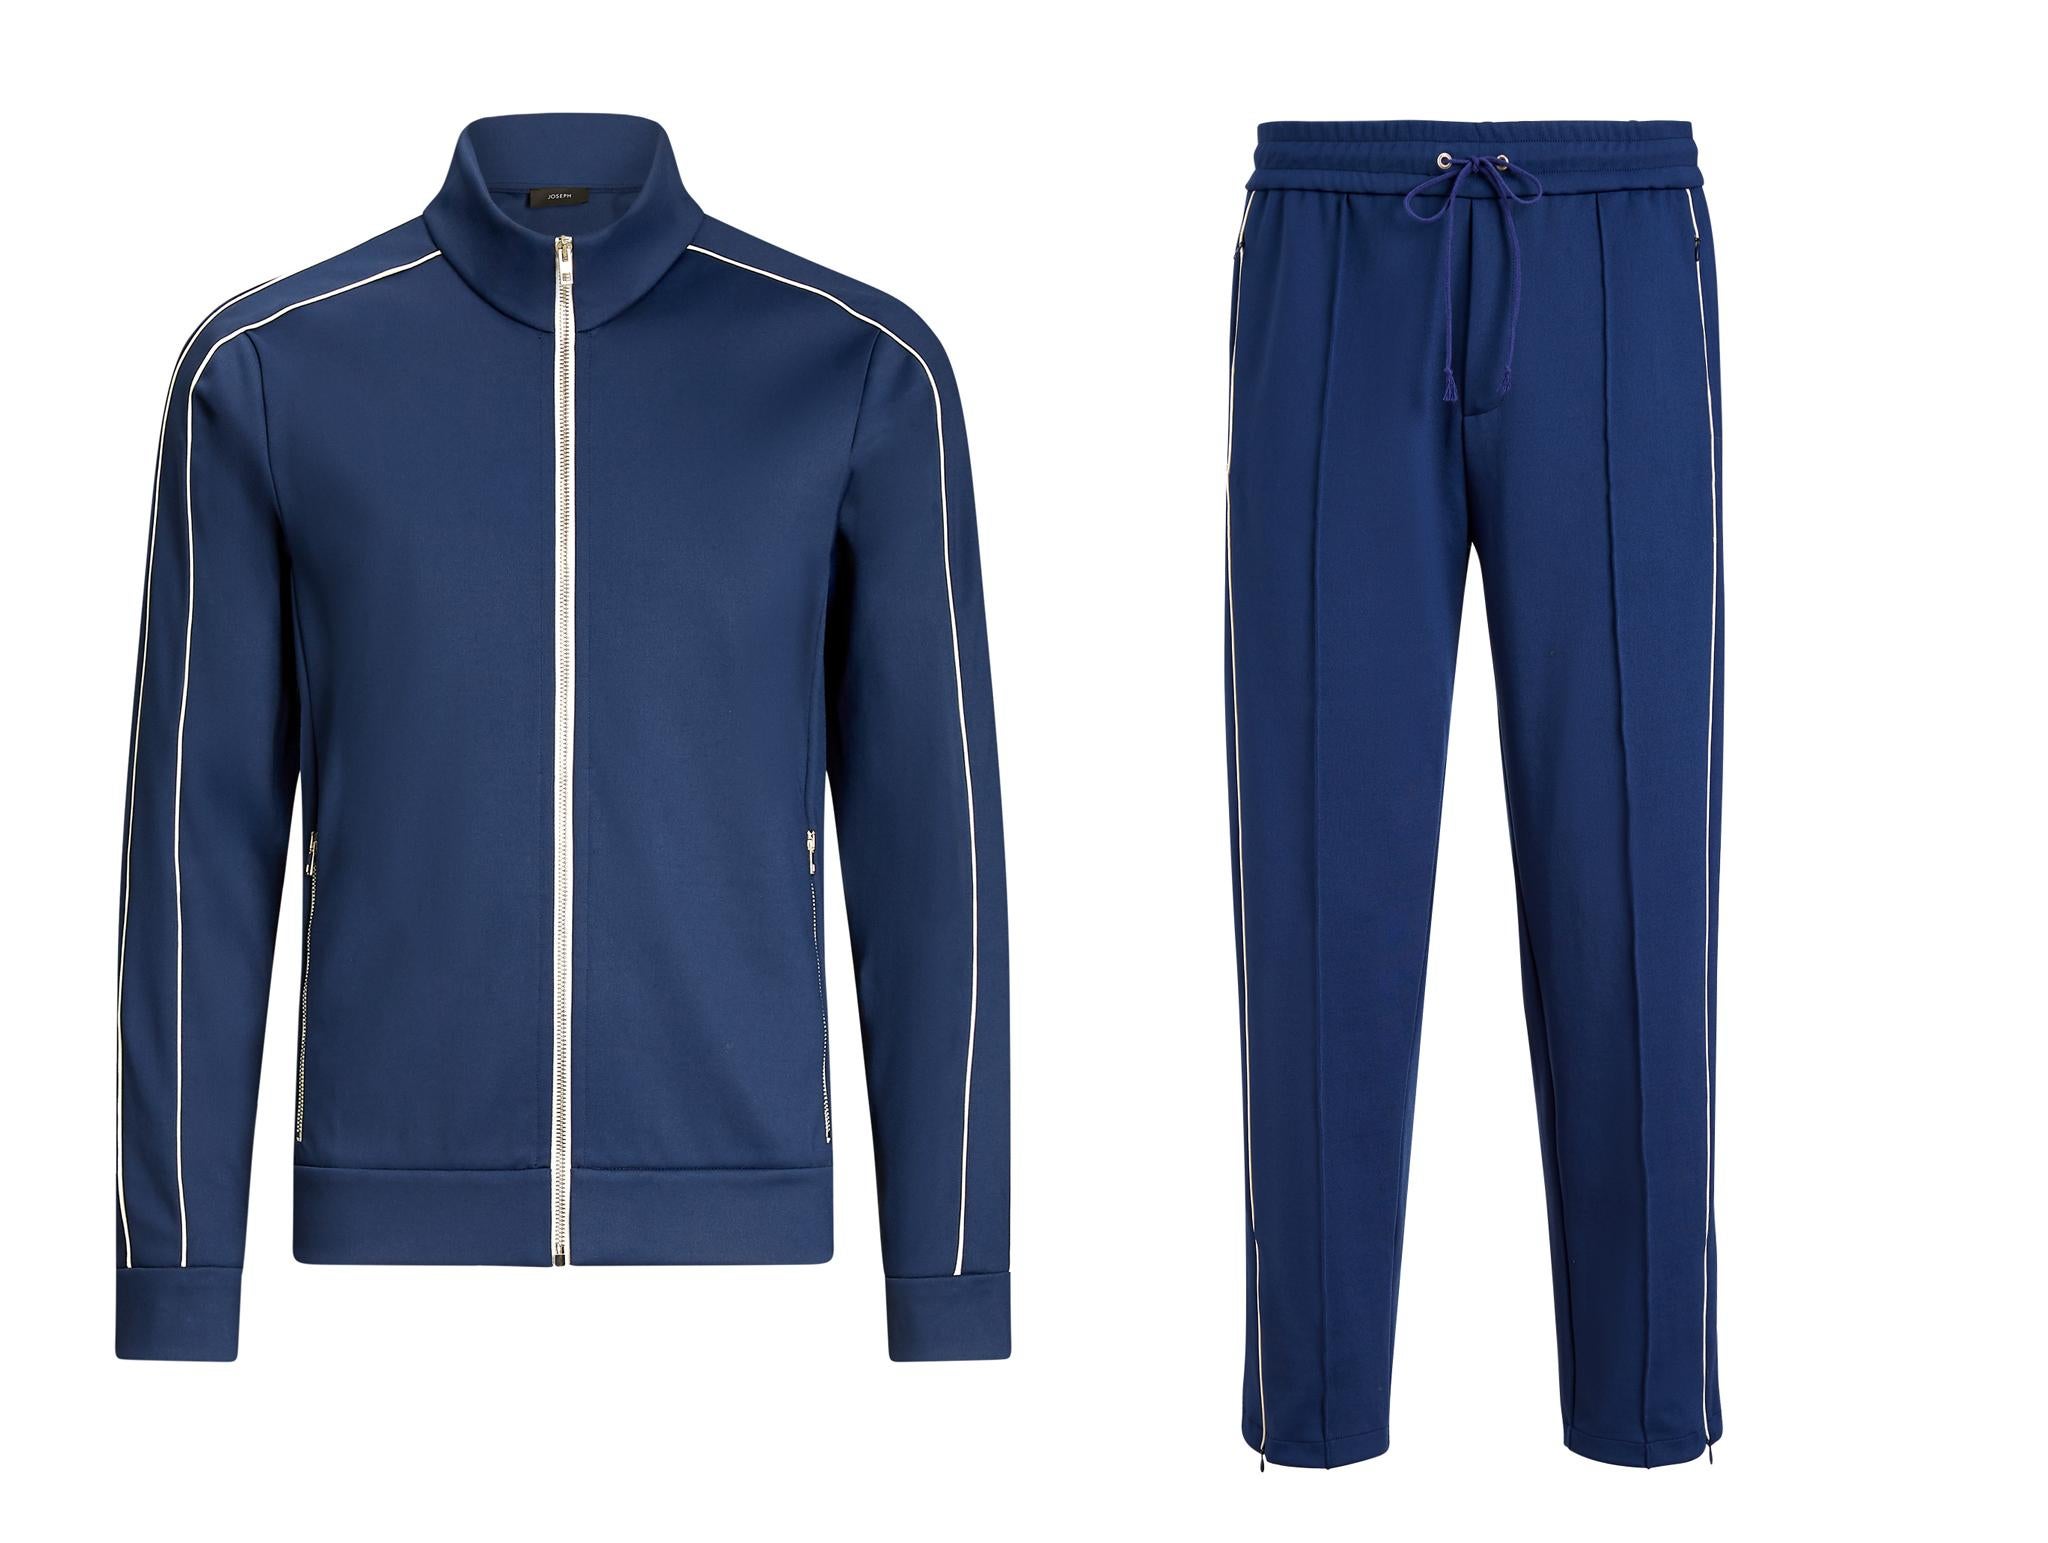 Best men's tracksuit: Choose from streetwear classics and statement sets